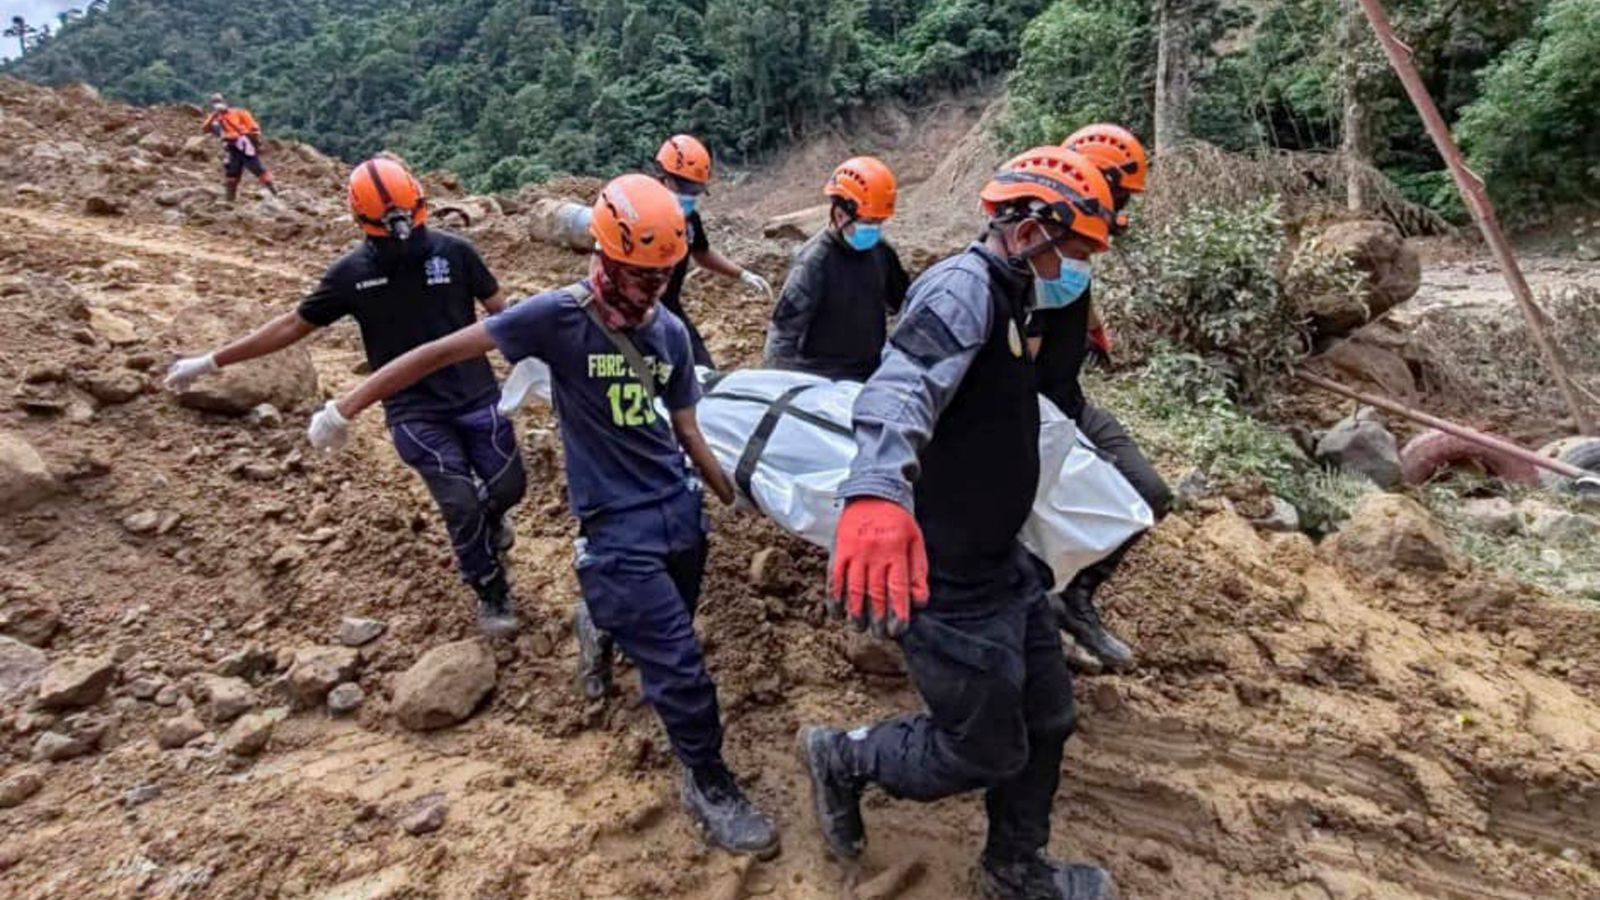 Death toll rises to 54 in Philippines landslide, 63 still missing